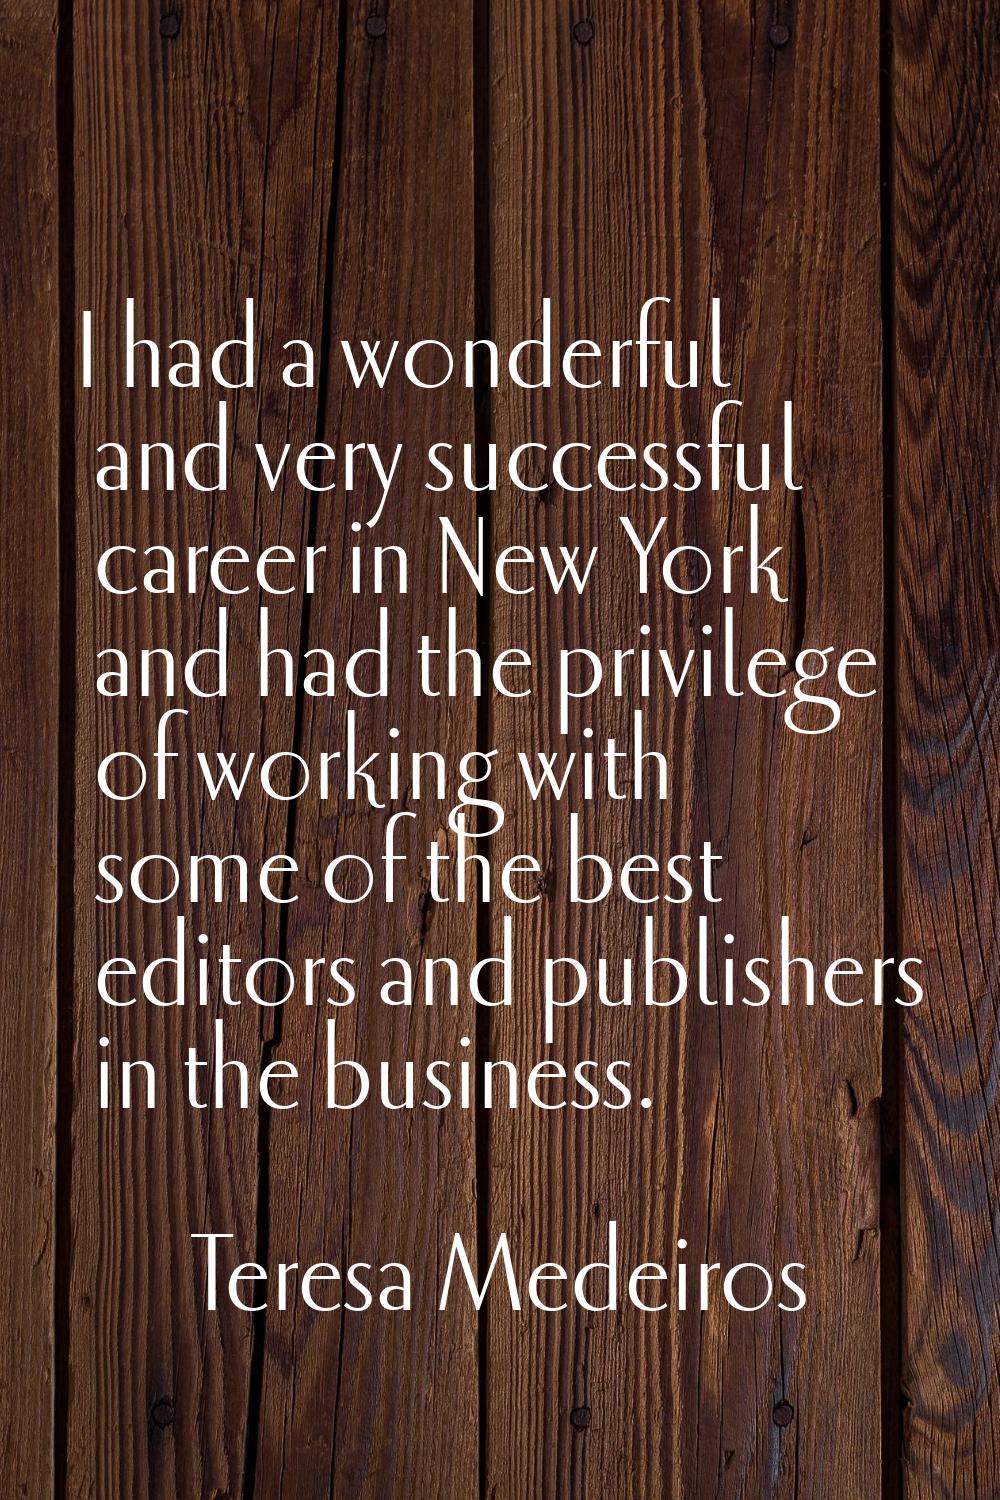 I had a wonderful and very successful career in New York and had the privilege of working with some